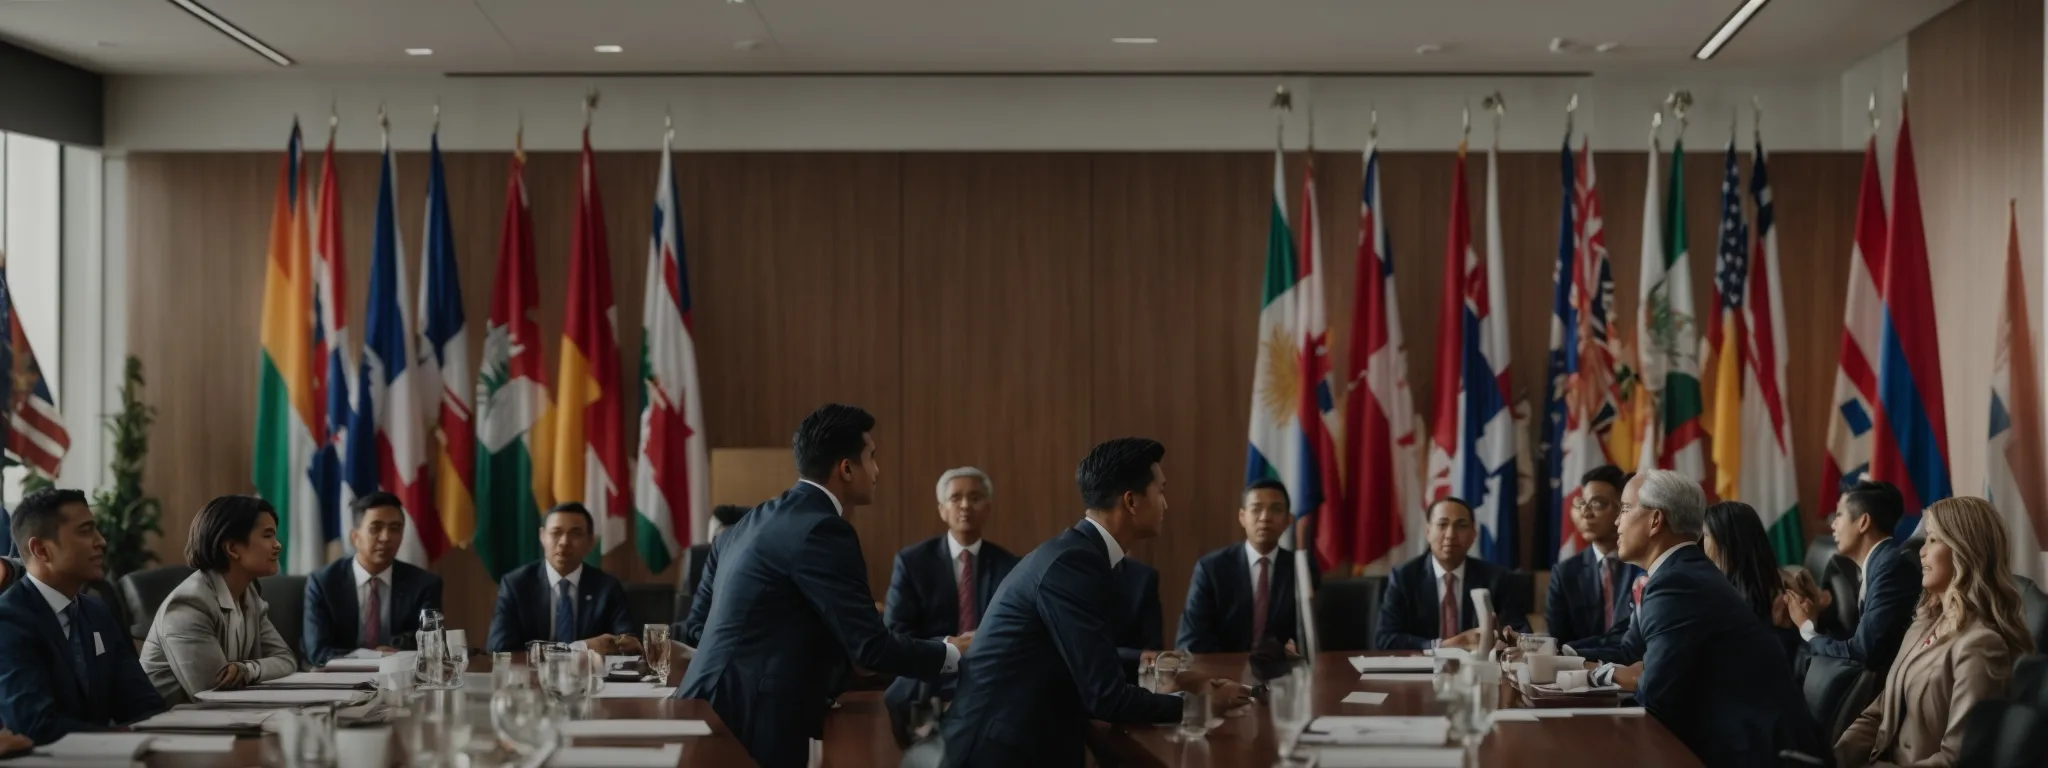 a businessperson shaking hands with a foreign delegate in a conference room adorned with flags of various nations.